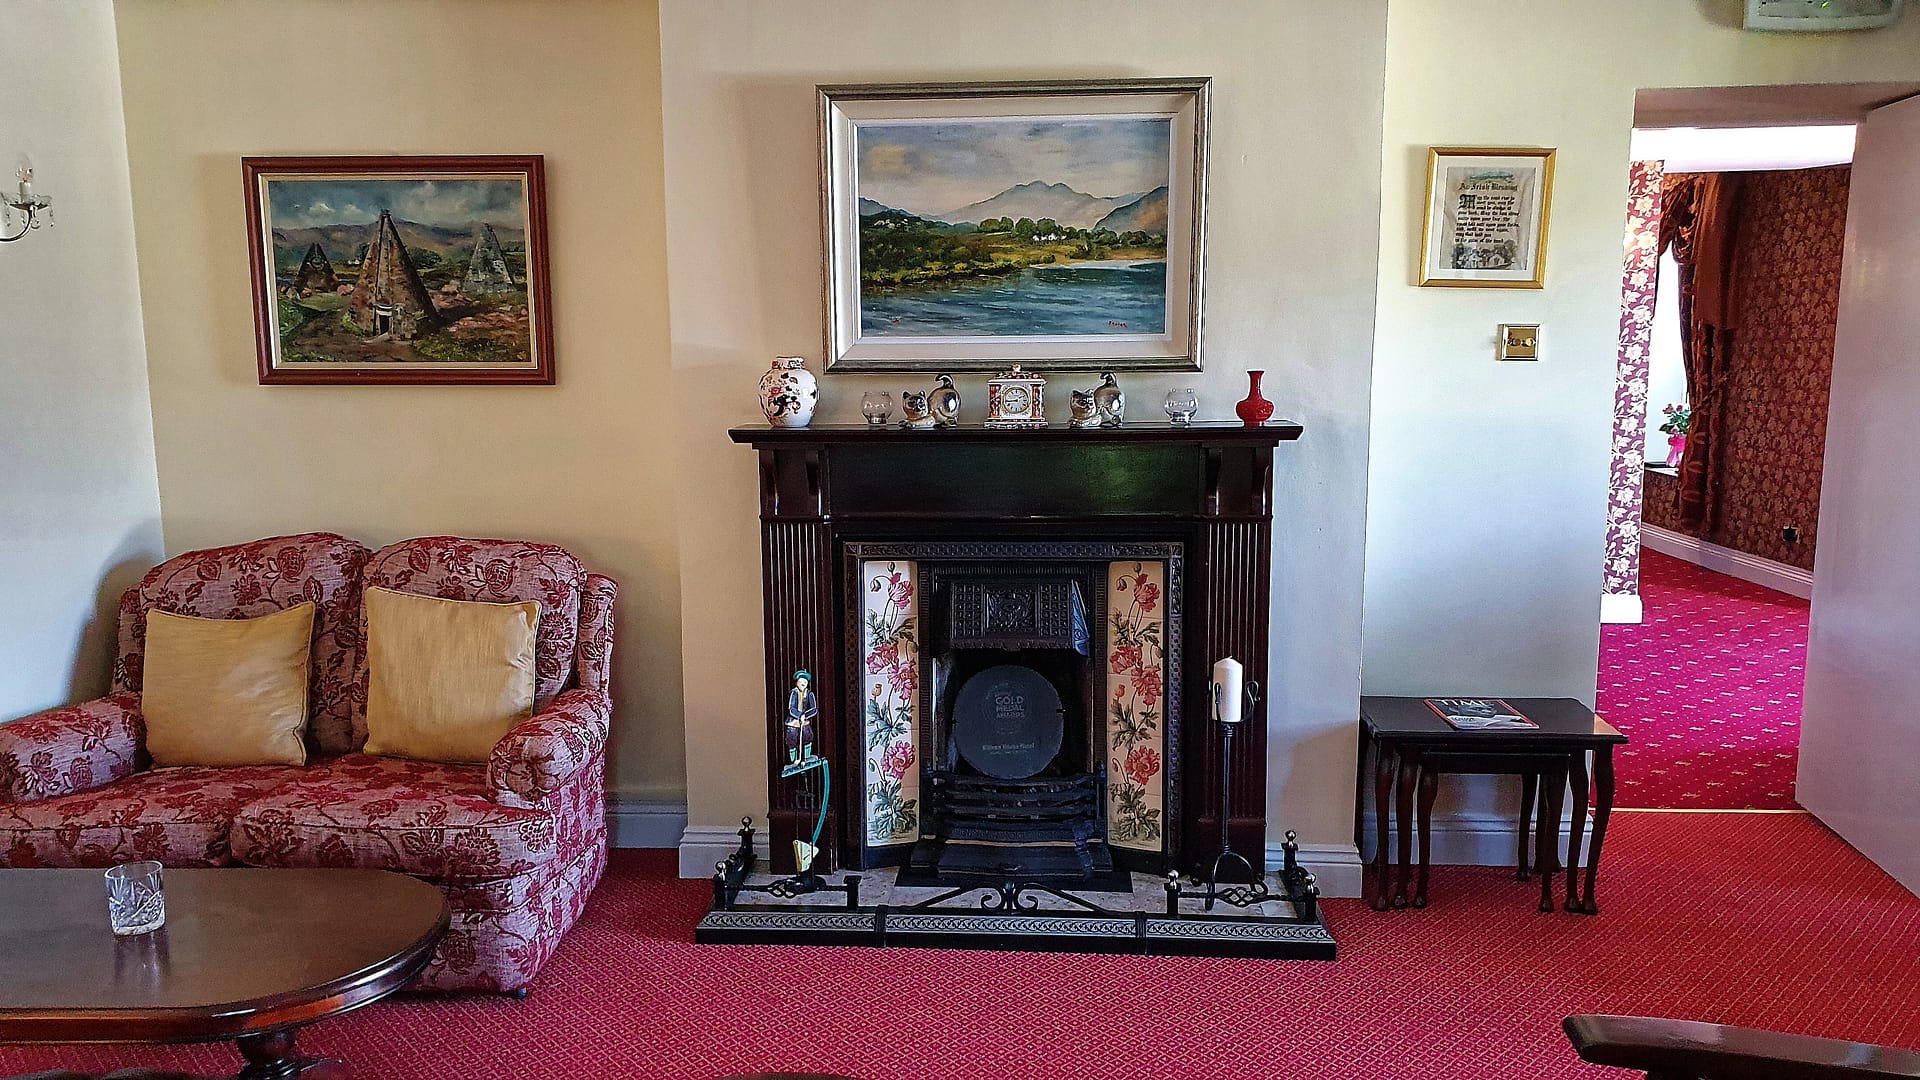 I love the fireplace, with its tiles of roses, in the sitting room.